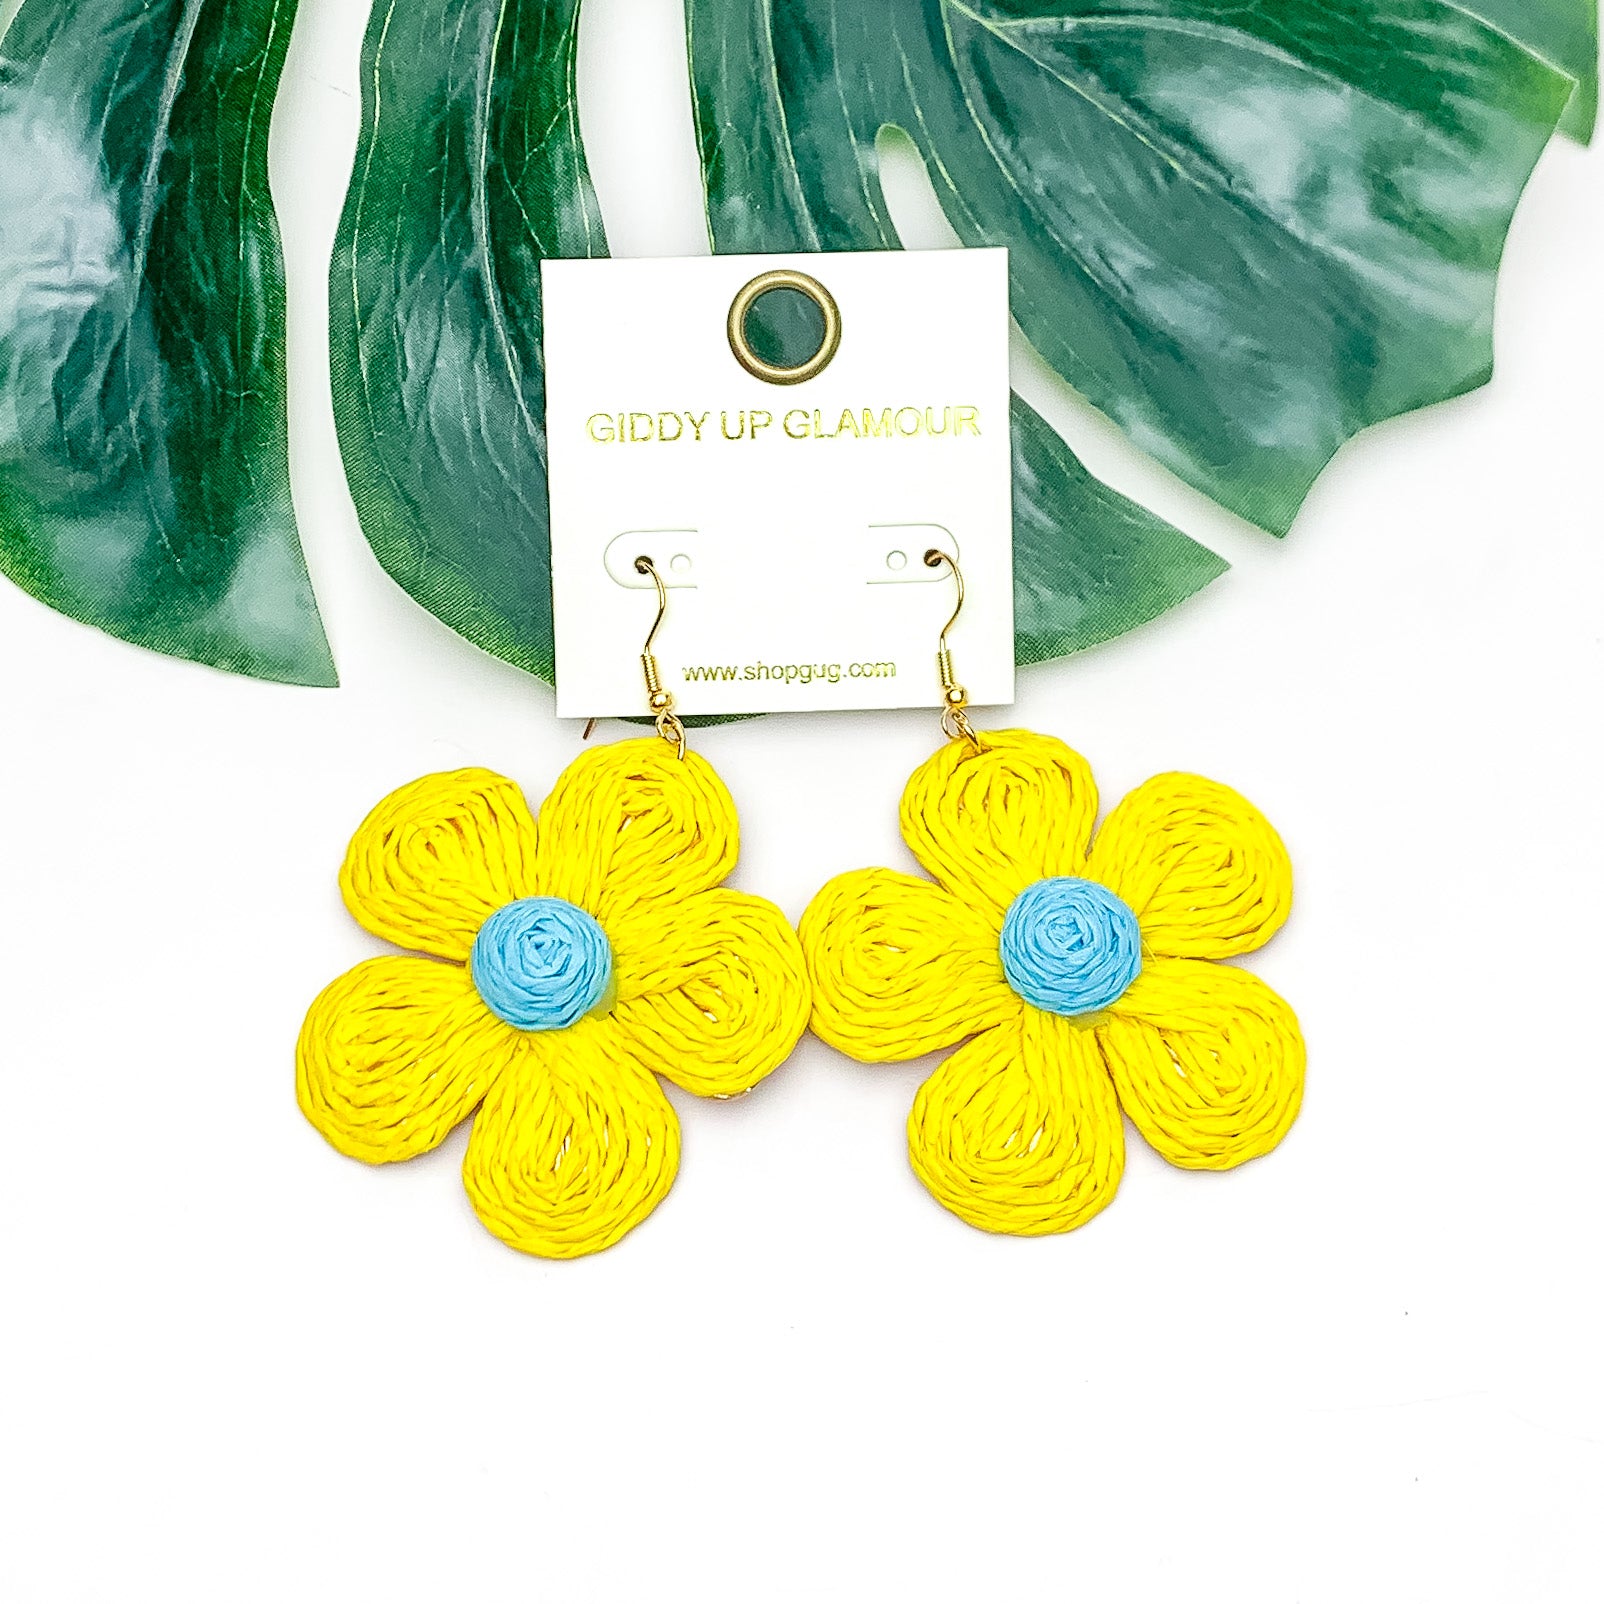 Darling Daisy Raffia Wrapped Flower Earrings in Yellow. Pictured on a white background with the earrings laying on a large leaf.